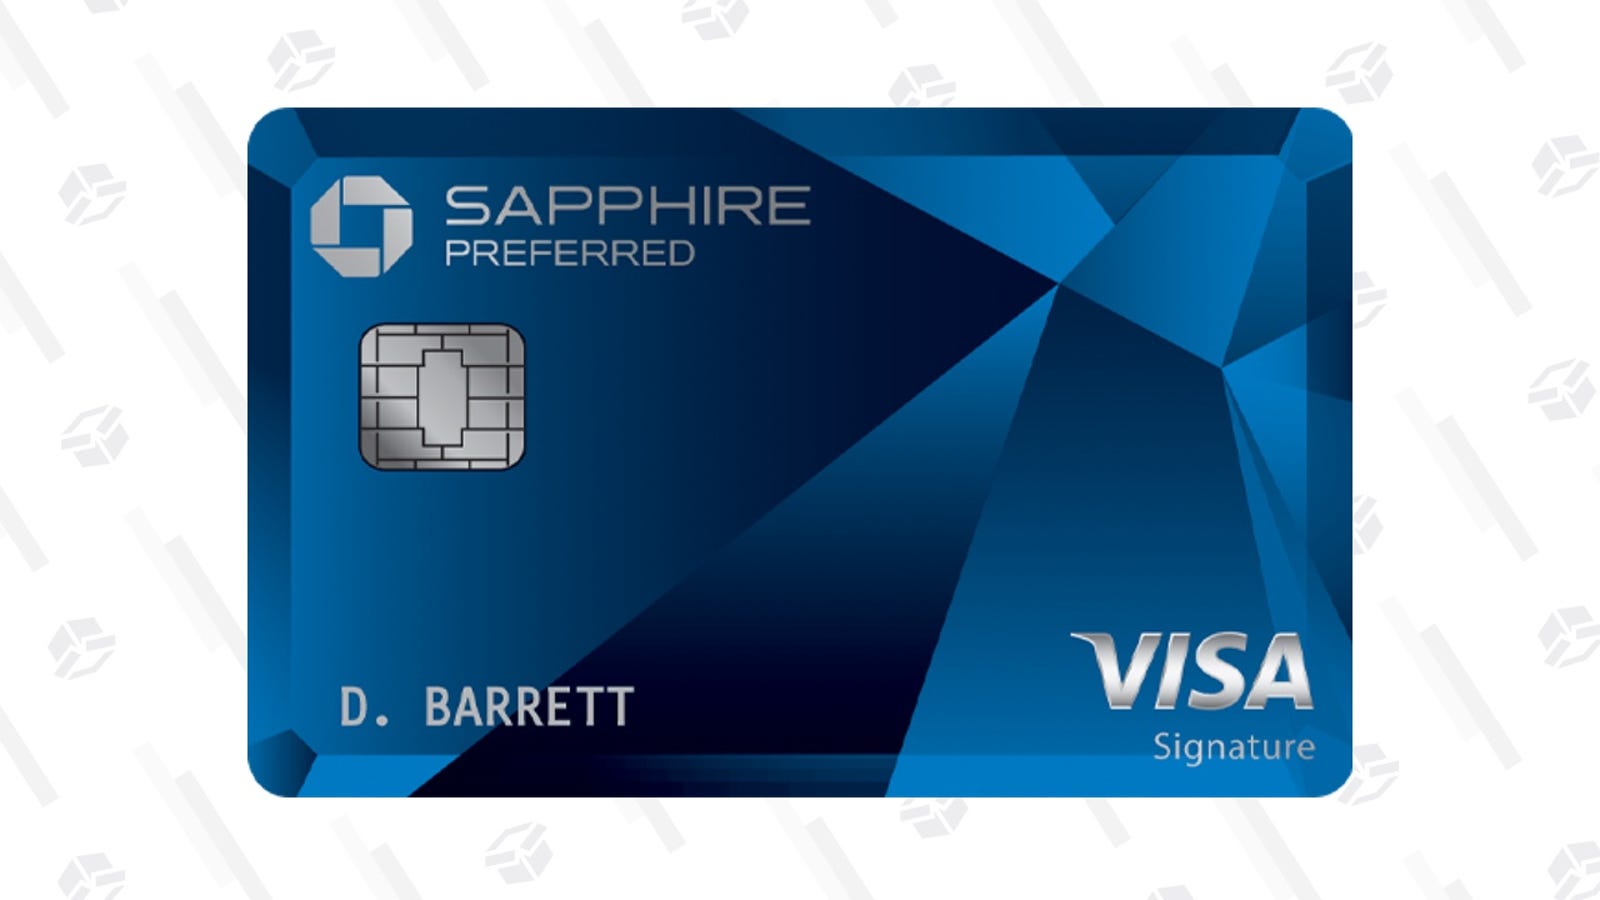 The Chase Sapphire Preferred Just Got a Bigger Offer, With a Catch